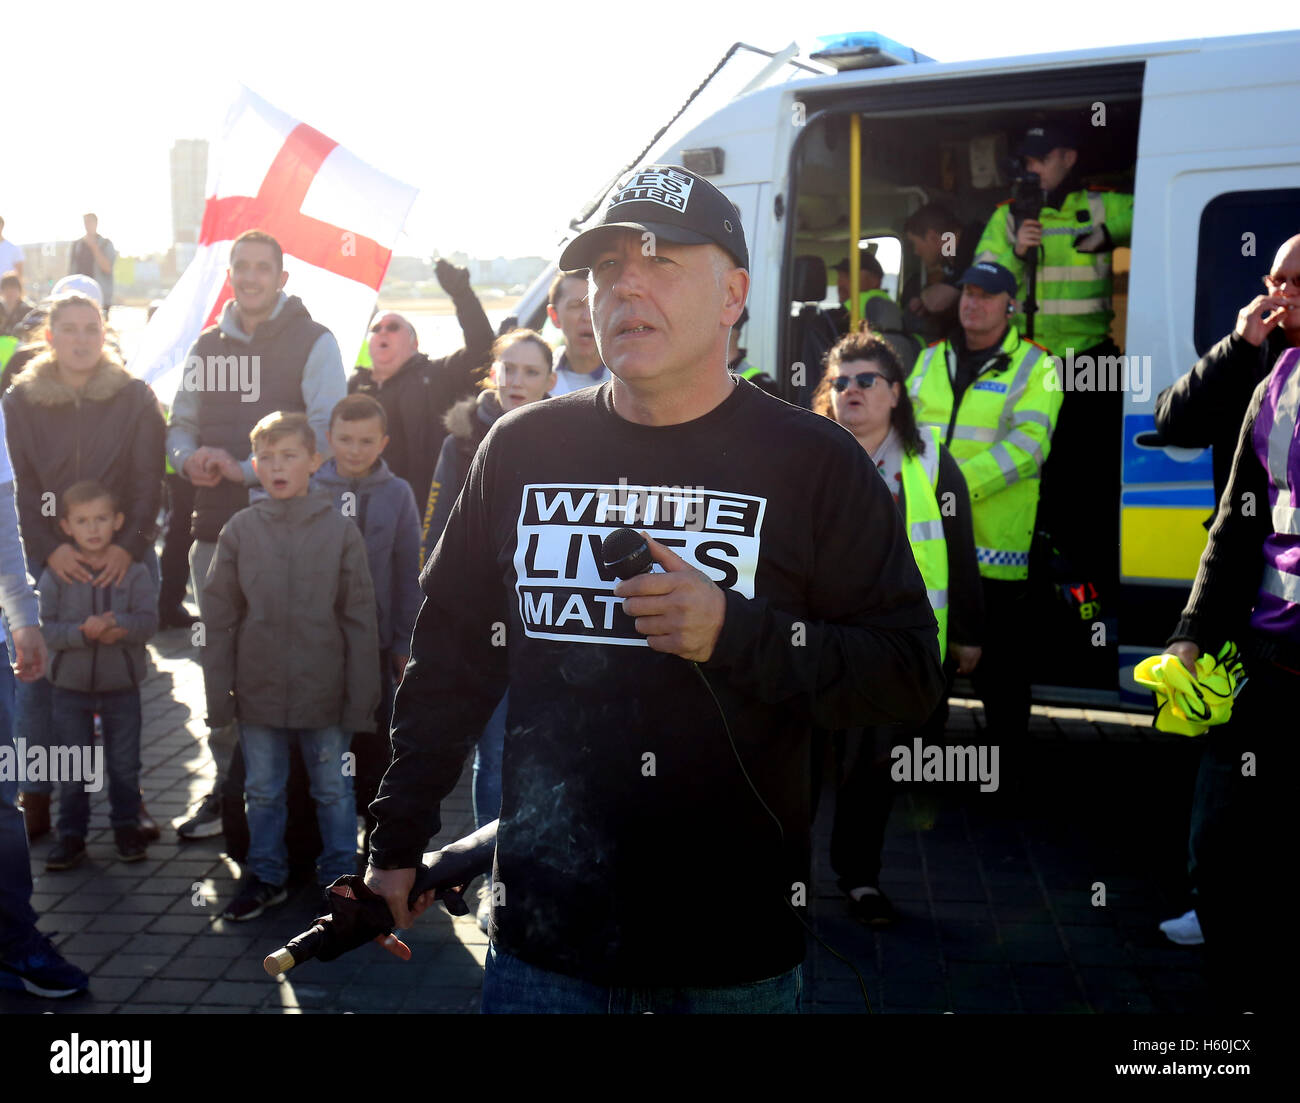 Paul Pitts of the far right group South East Alliance speaks during a White Lives Matter march in Margate, Kent. Stock Photo